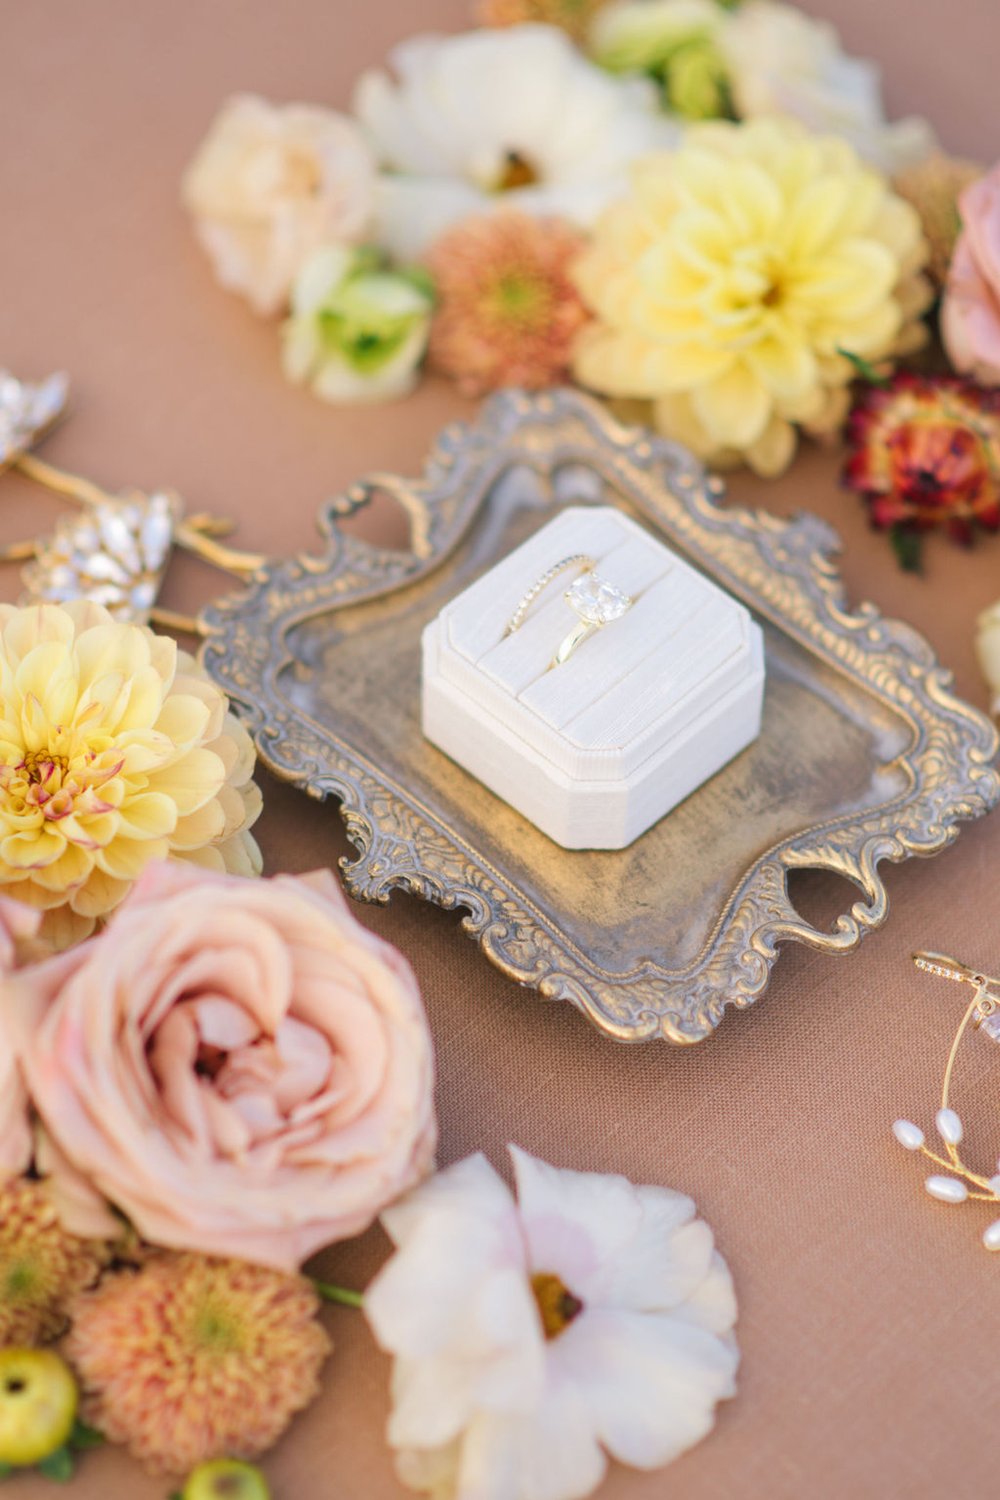 Linen Mrs Box with gold engagement ring with Blair Nadeau's wedding accessories.